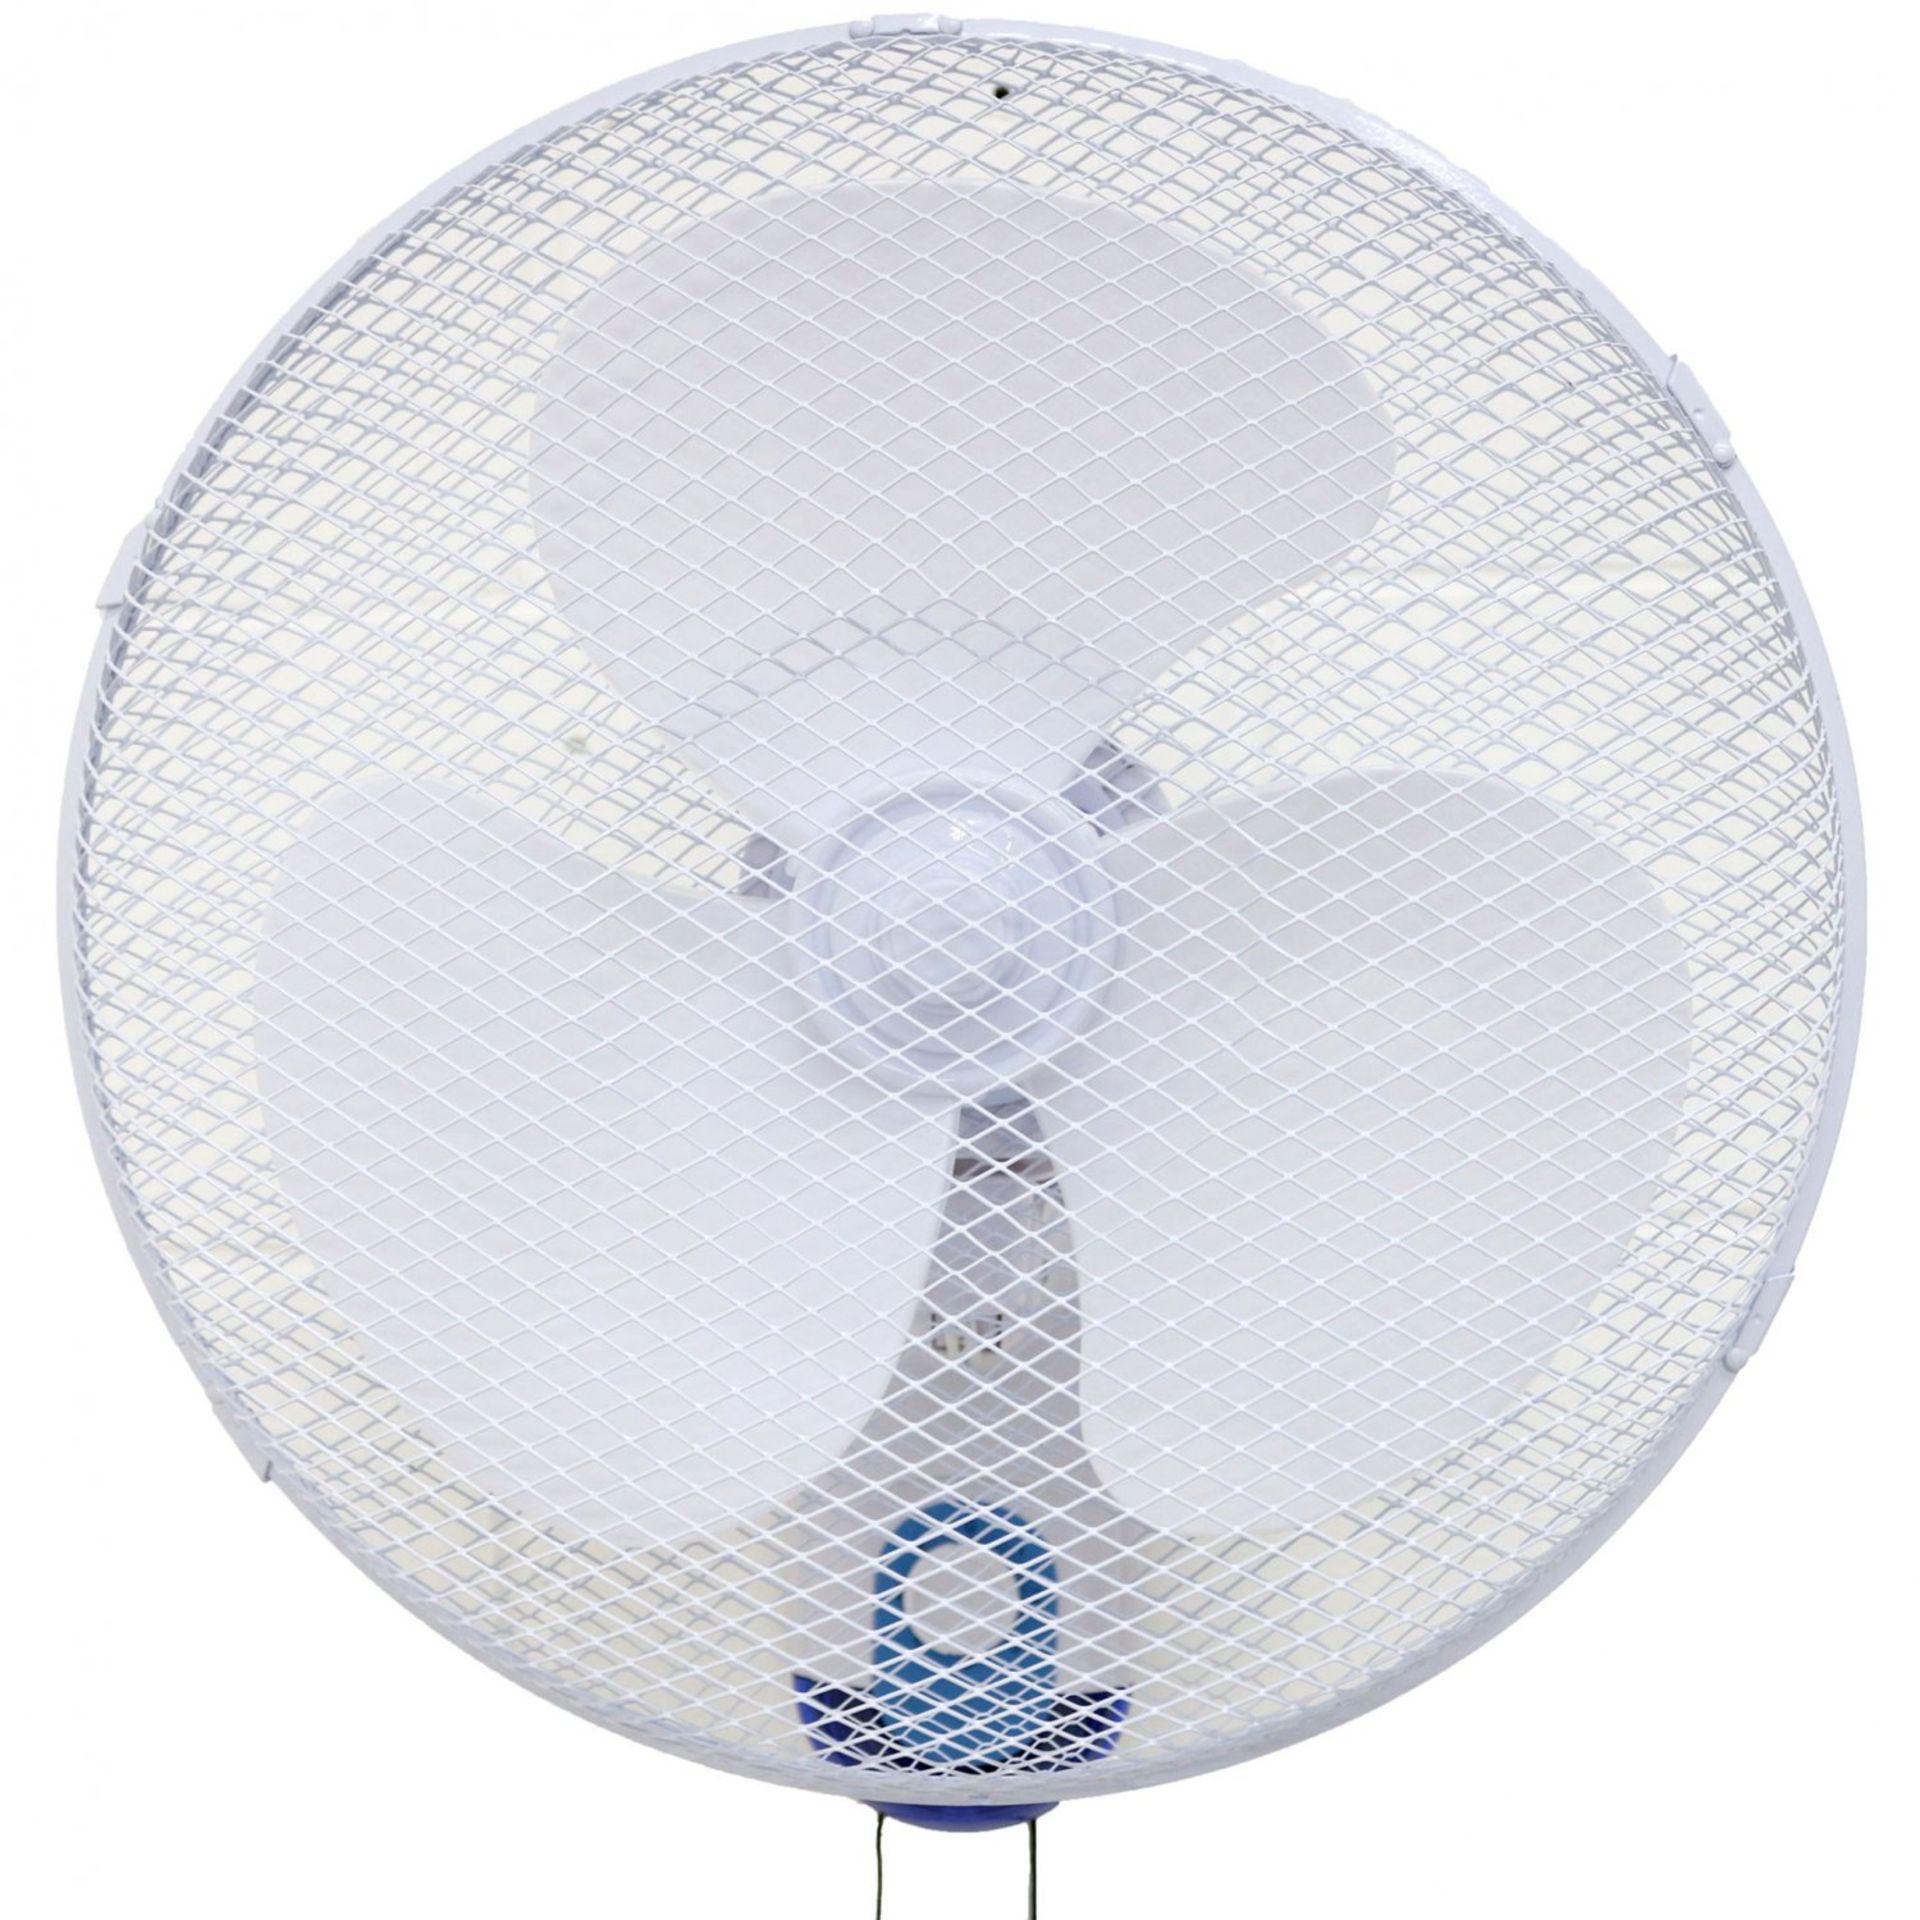 (LF235) 16" Wall Mounted Fan Stay cool this year with the 16" Wall Mounted Fan - fitted with... - Image 2 of 2